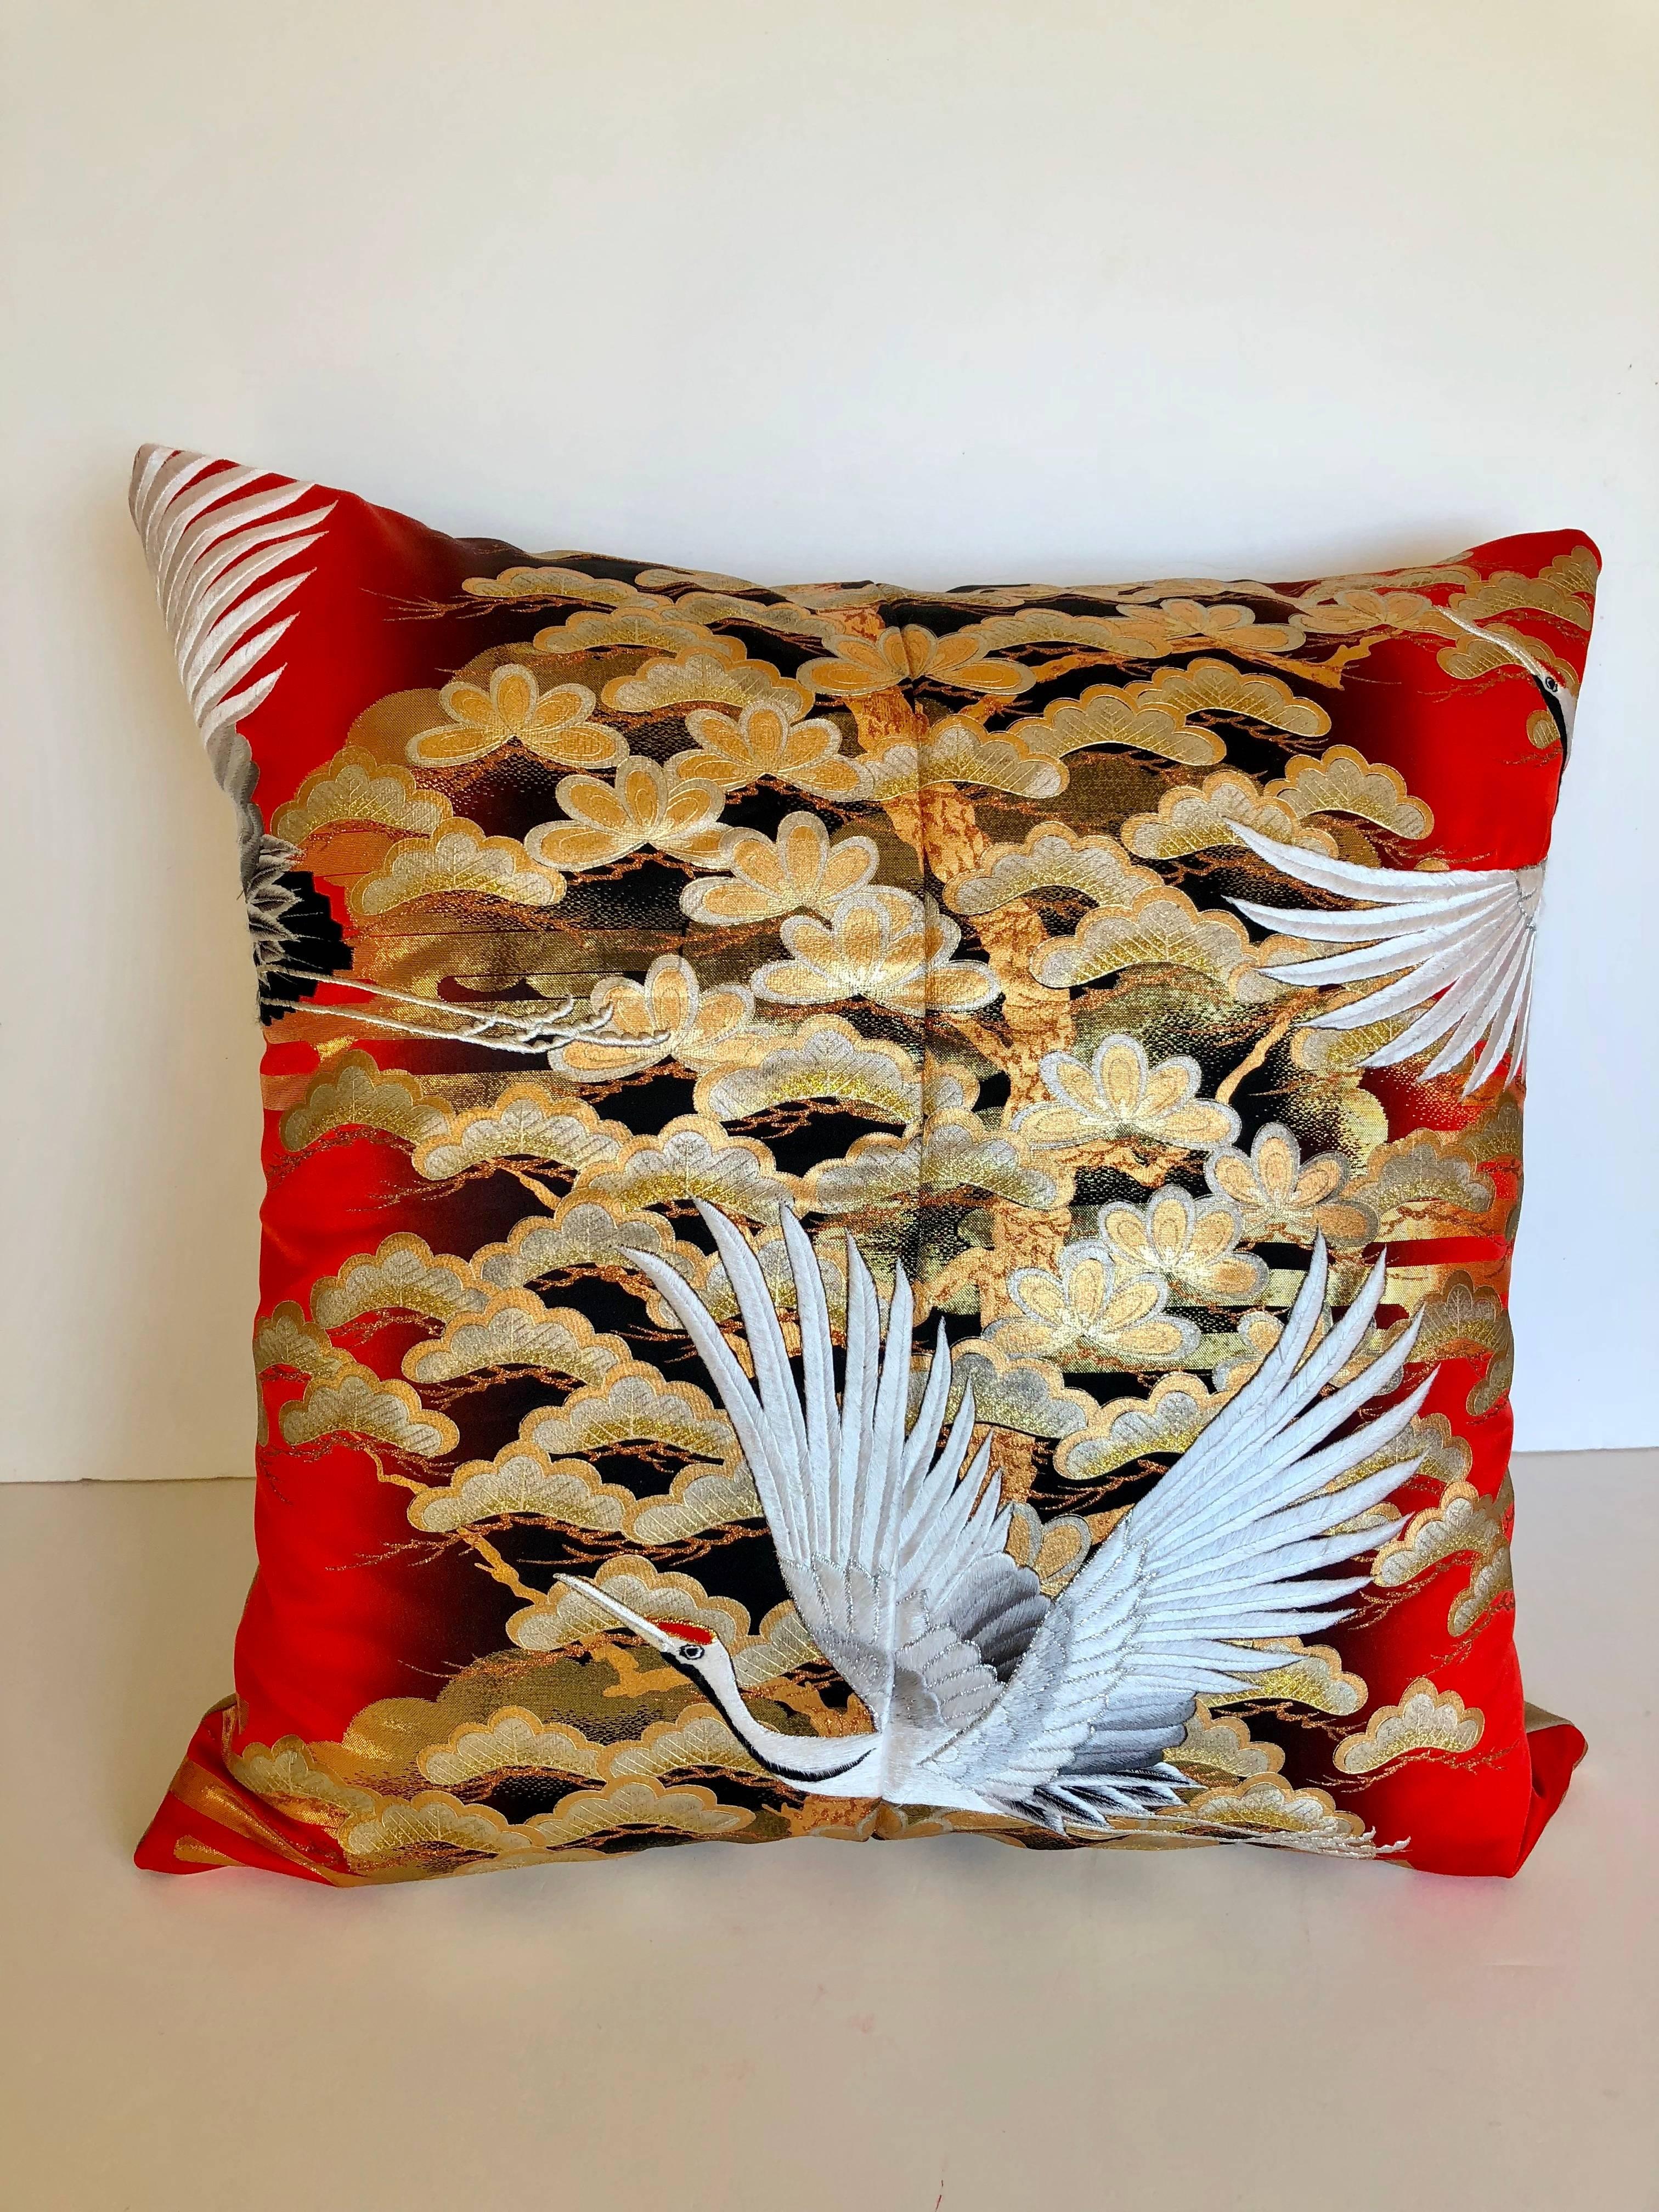 Custom pillow cut from a vintage Japanese silk Uchikake, the traditional wedding kimono. The silk is embellished with hand-painted designs and embroidered birds. The pillow is backed in a wool/silk textile, filled with an insert of 50/50 down and